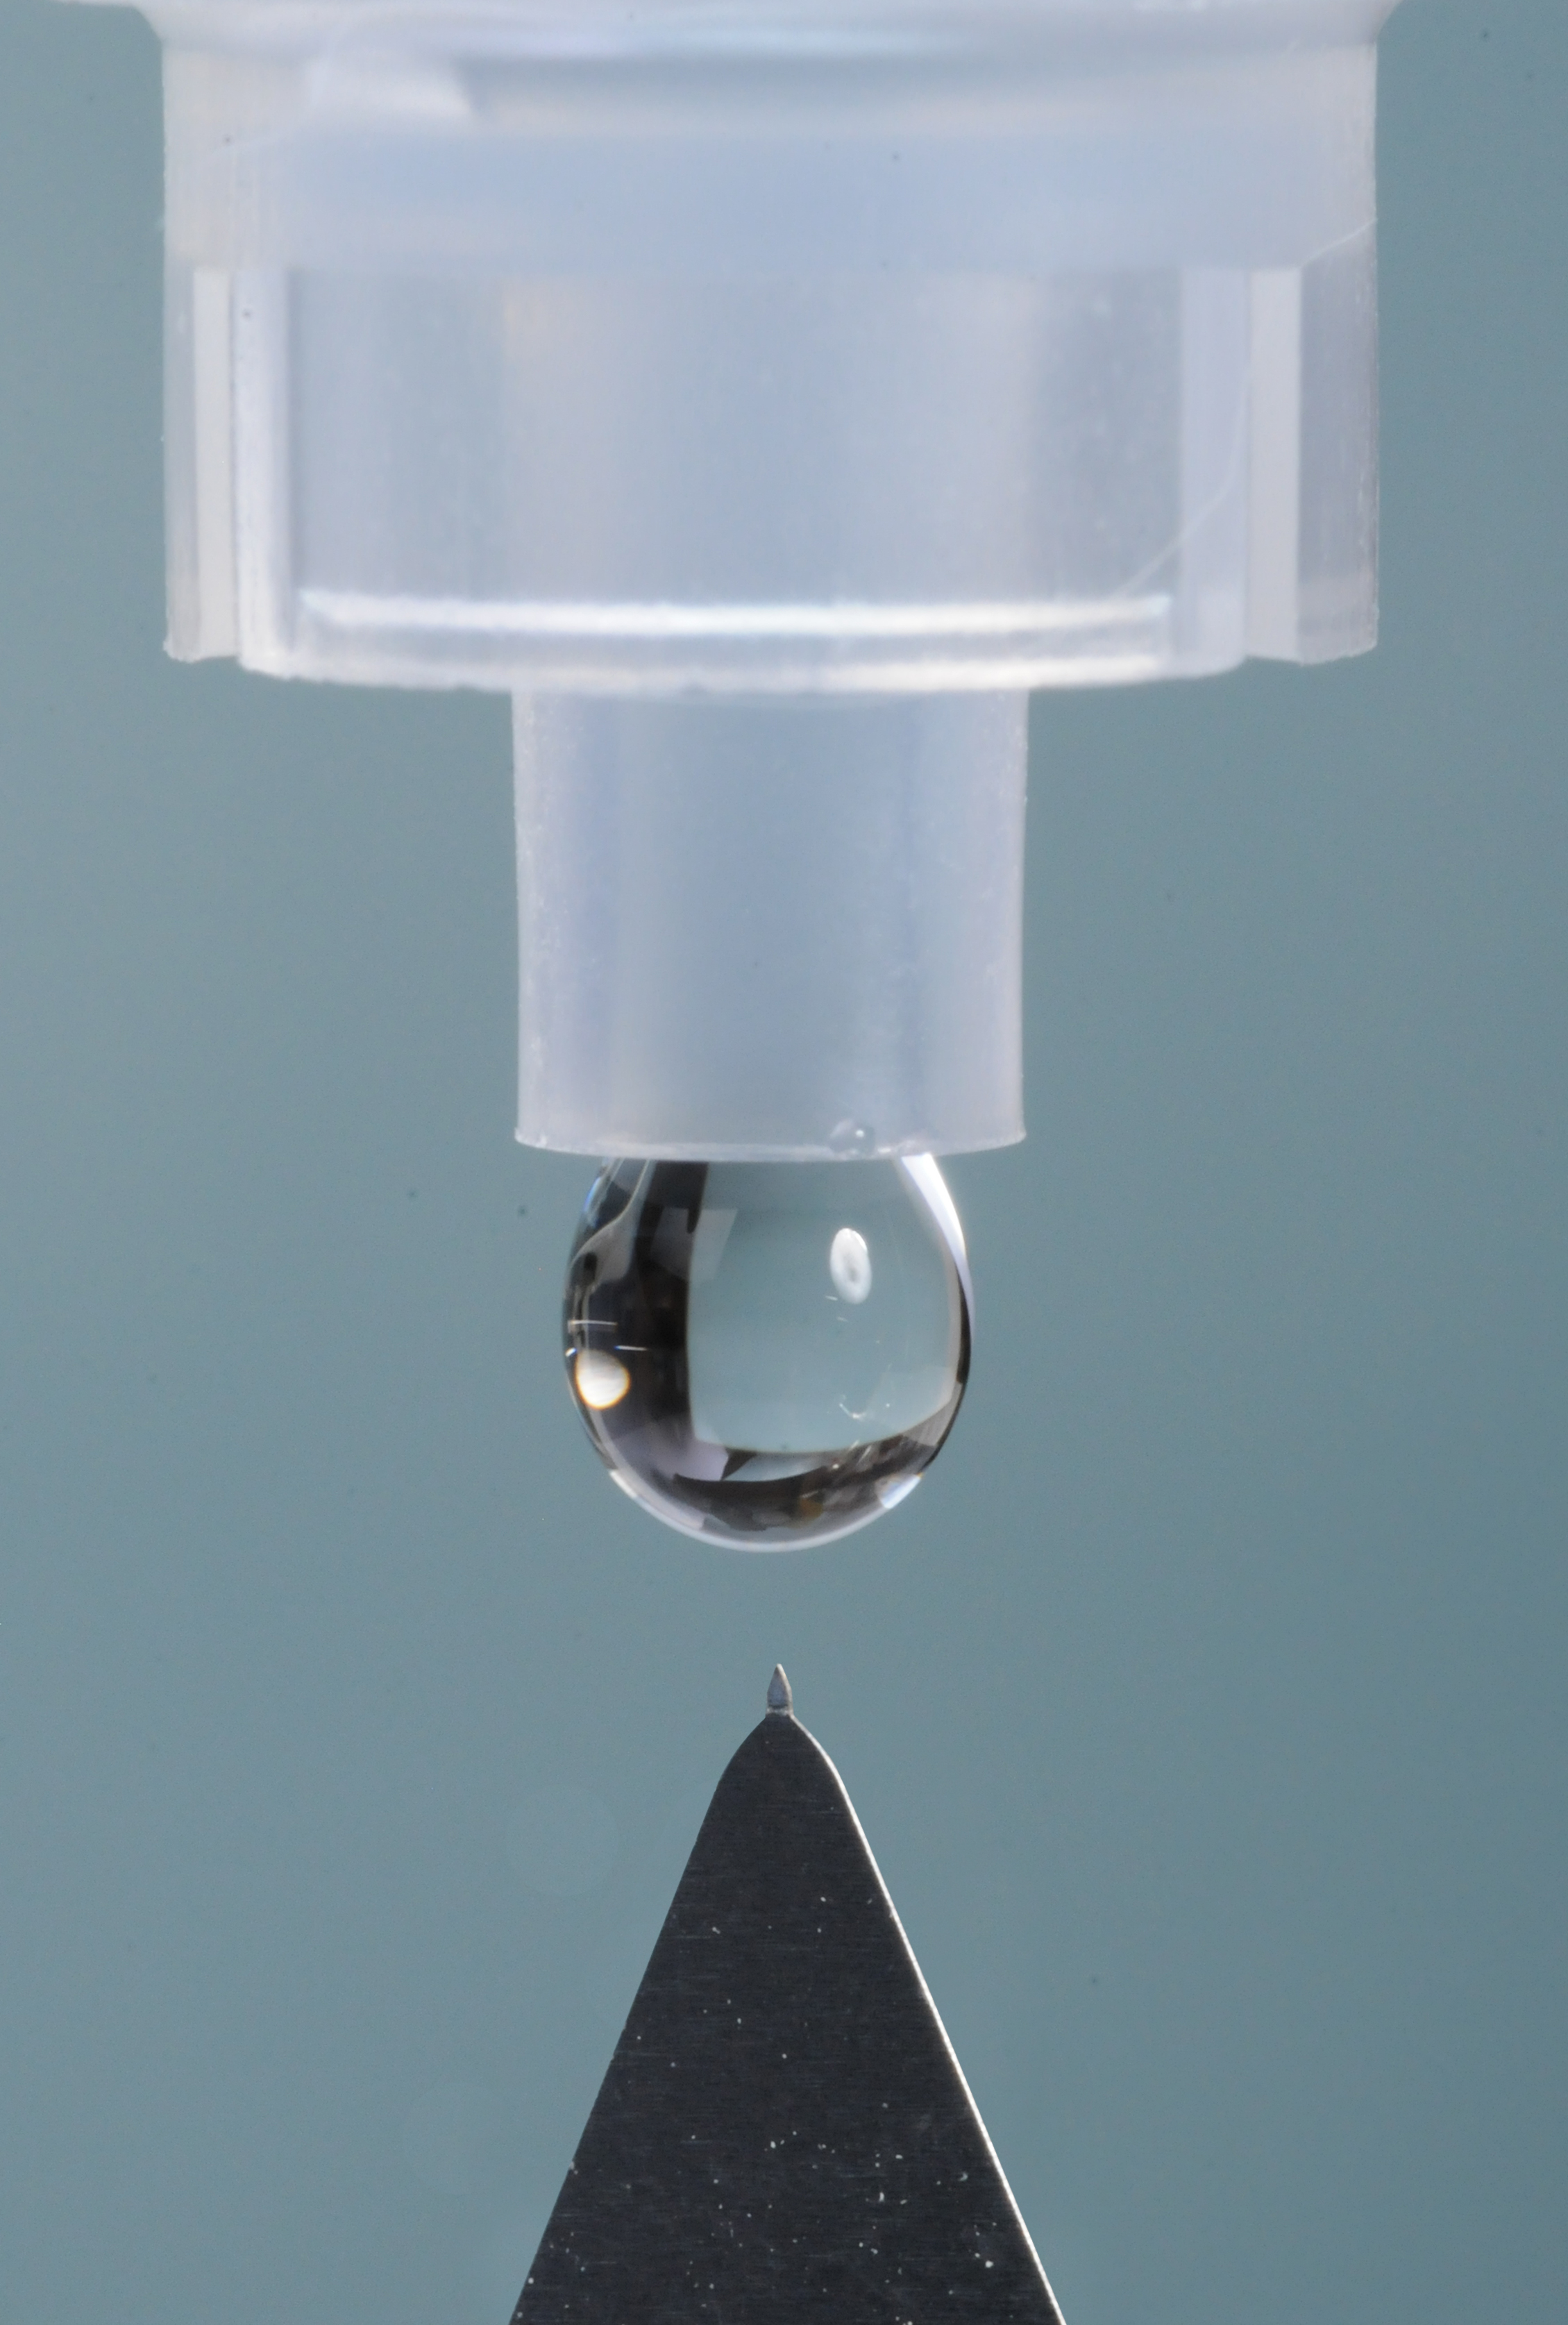 A solid microneedle coated with medication for delivery into the cornea is shown next to a liquid drop from a conventional eye dropper. (Photo credit: Gary Meek).